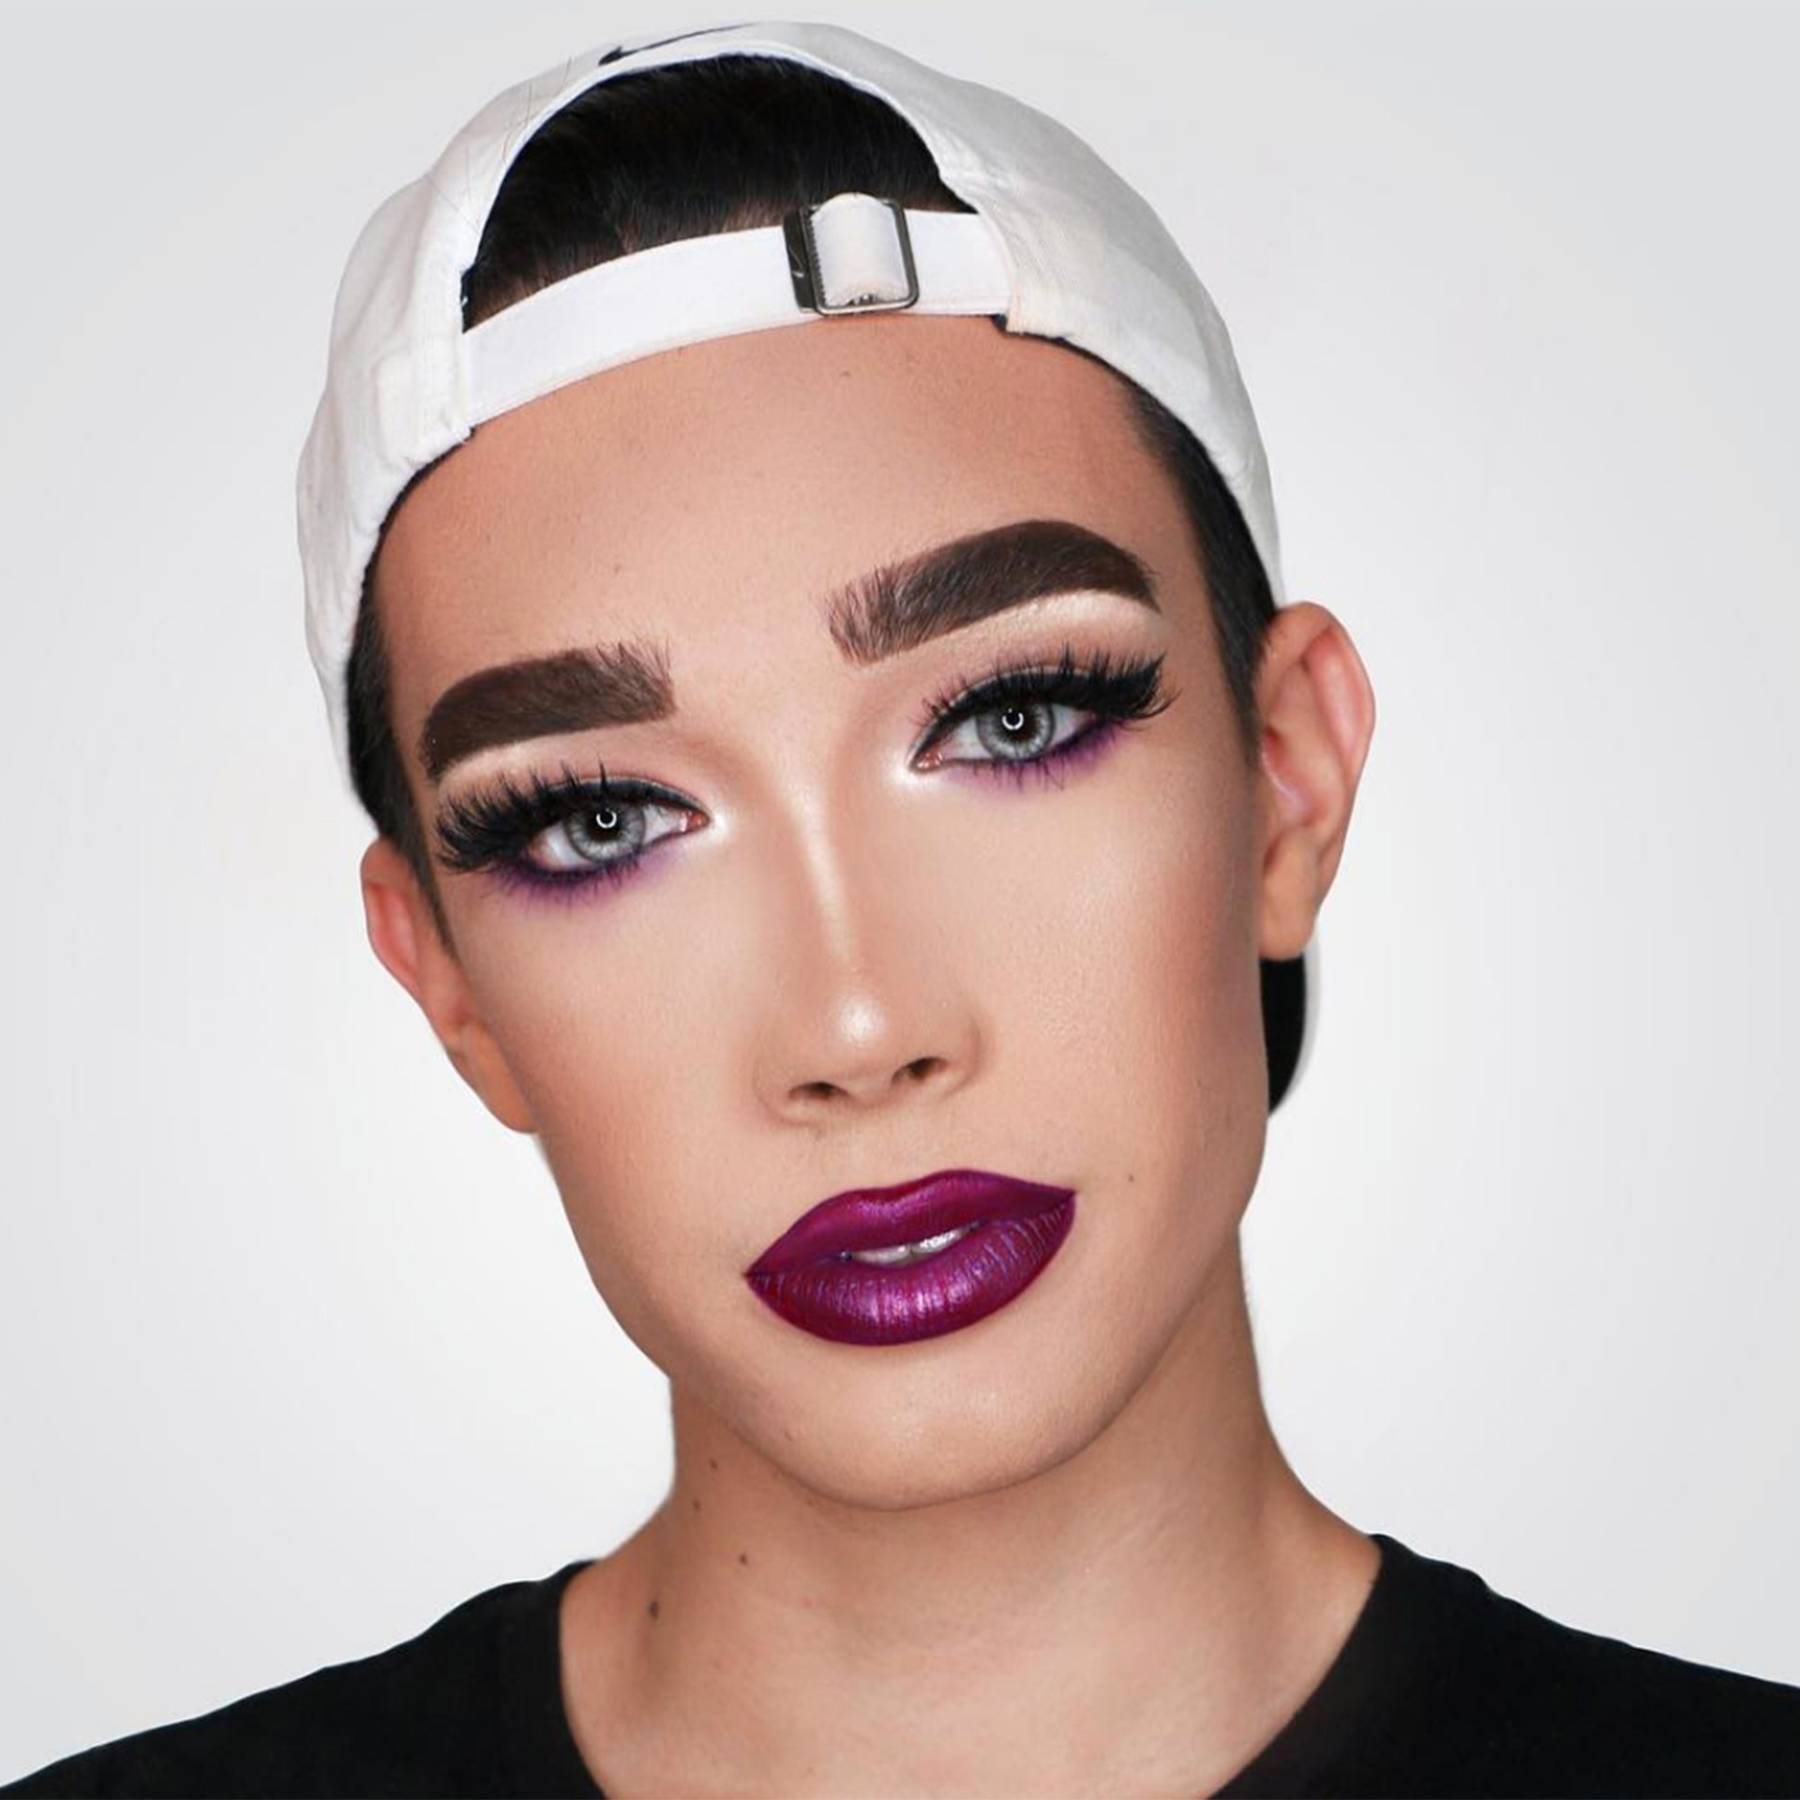 James Charles Makeup Artist Videos Coverboy Katy Perry Glamour UK